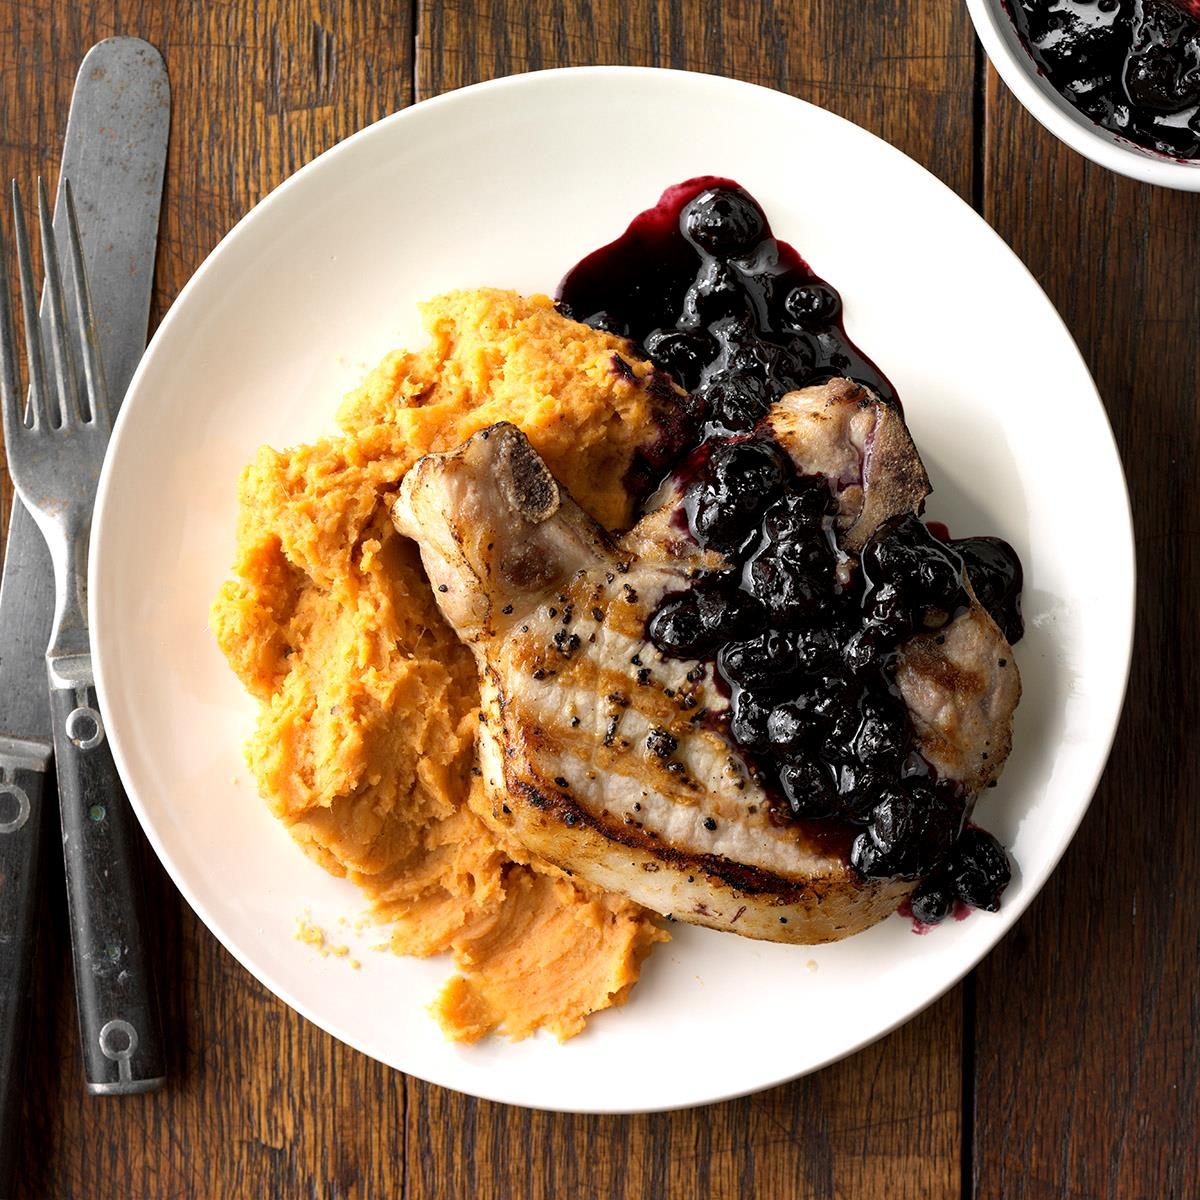 Runner-Up: Blueberry Chops with Cinnamon Sweet Potatoes